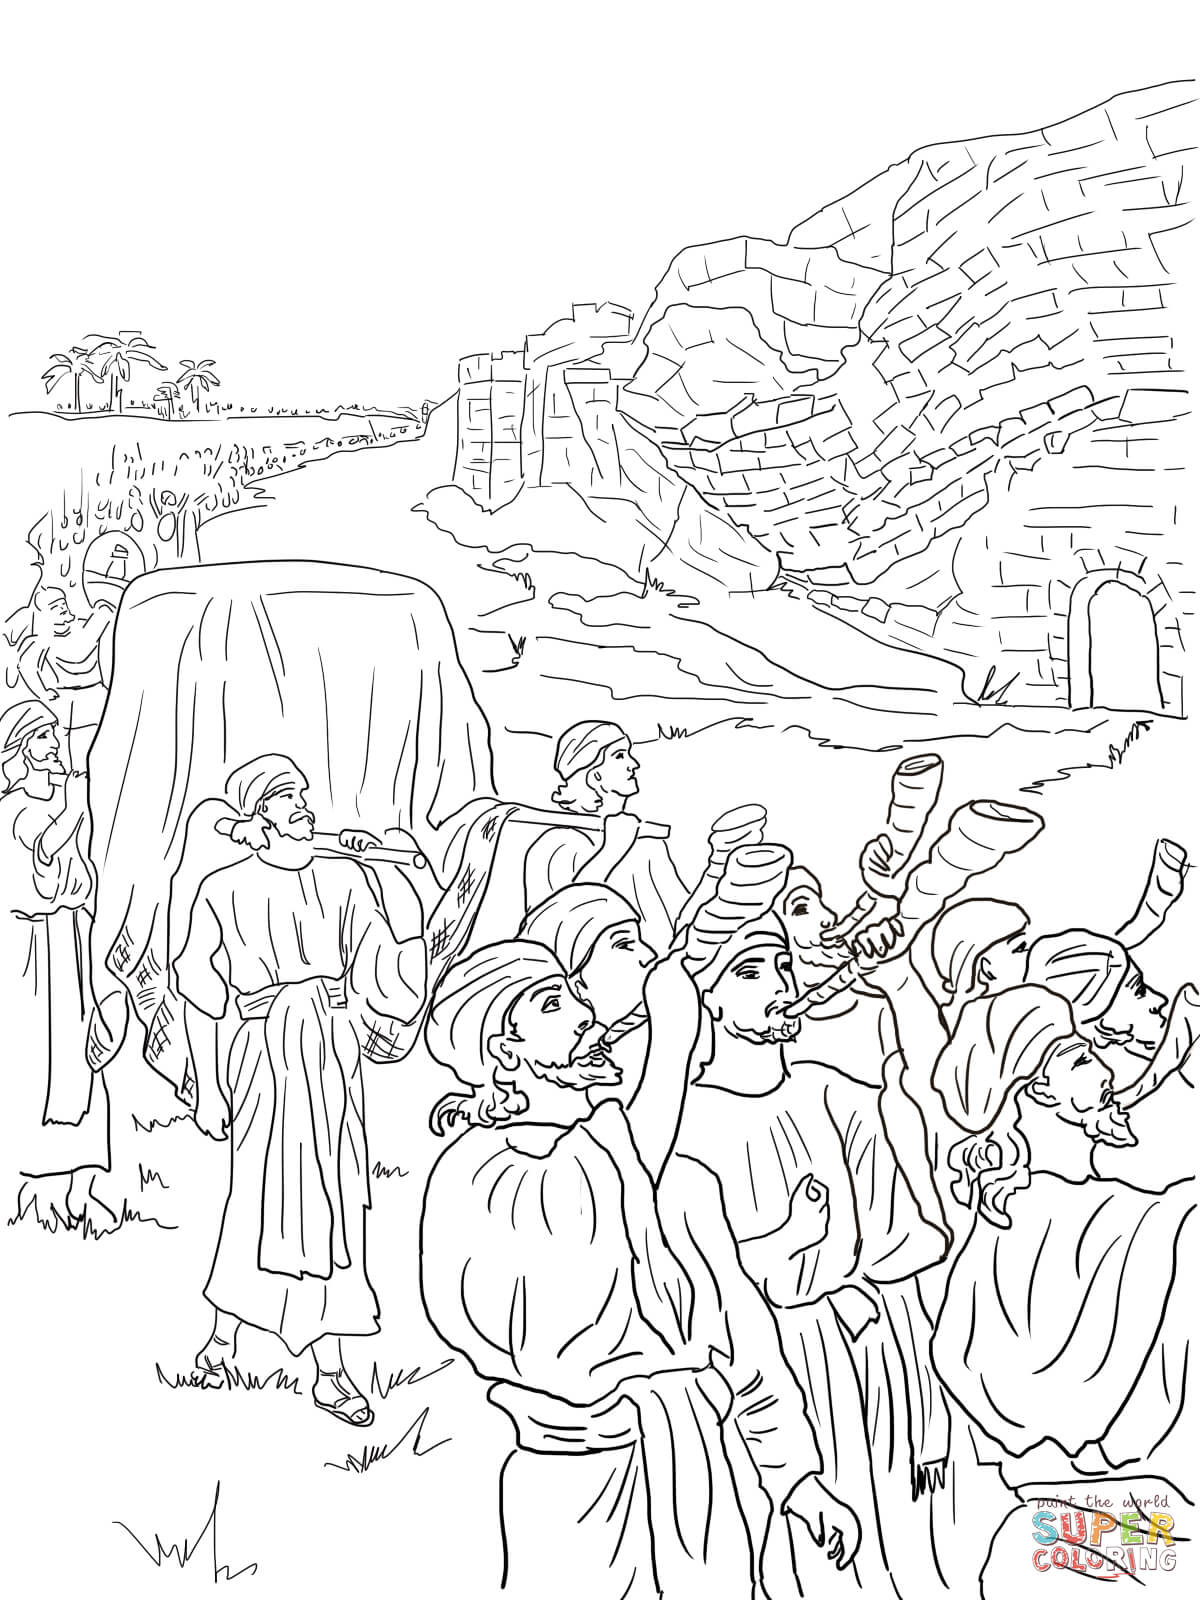 Jericho | The Battle, Bible Coloring Pages and Battle ...